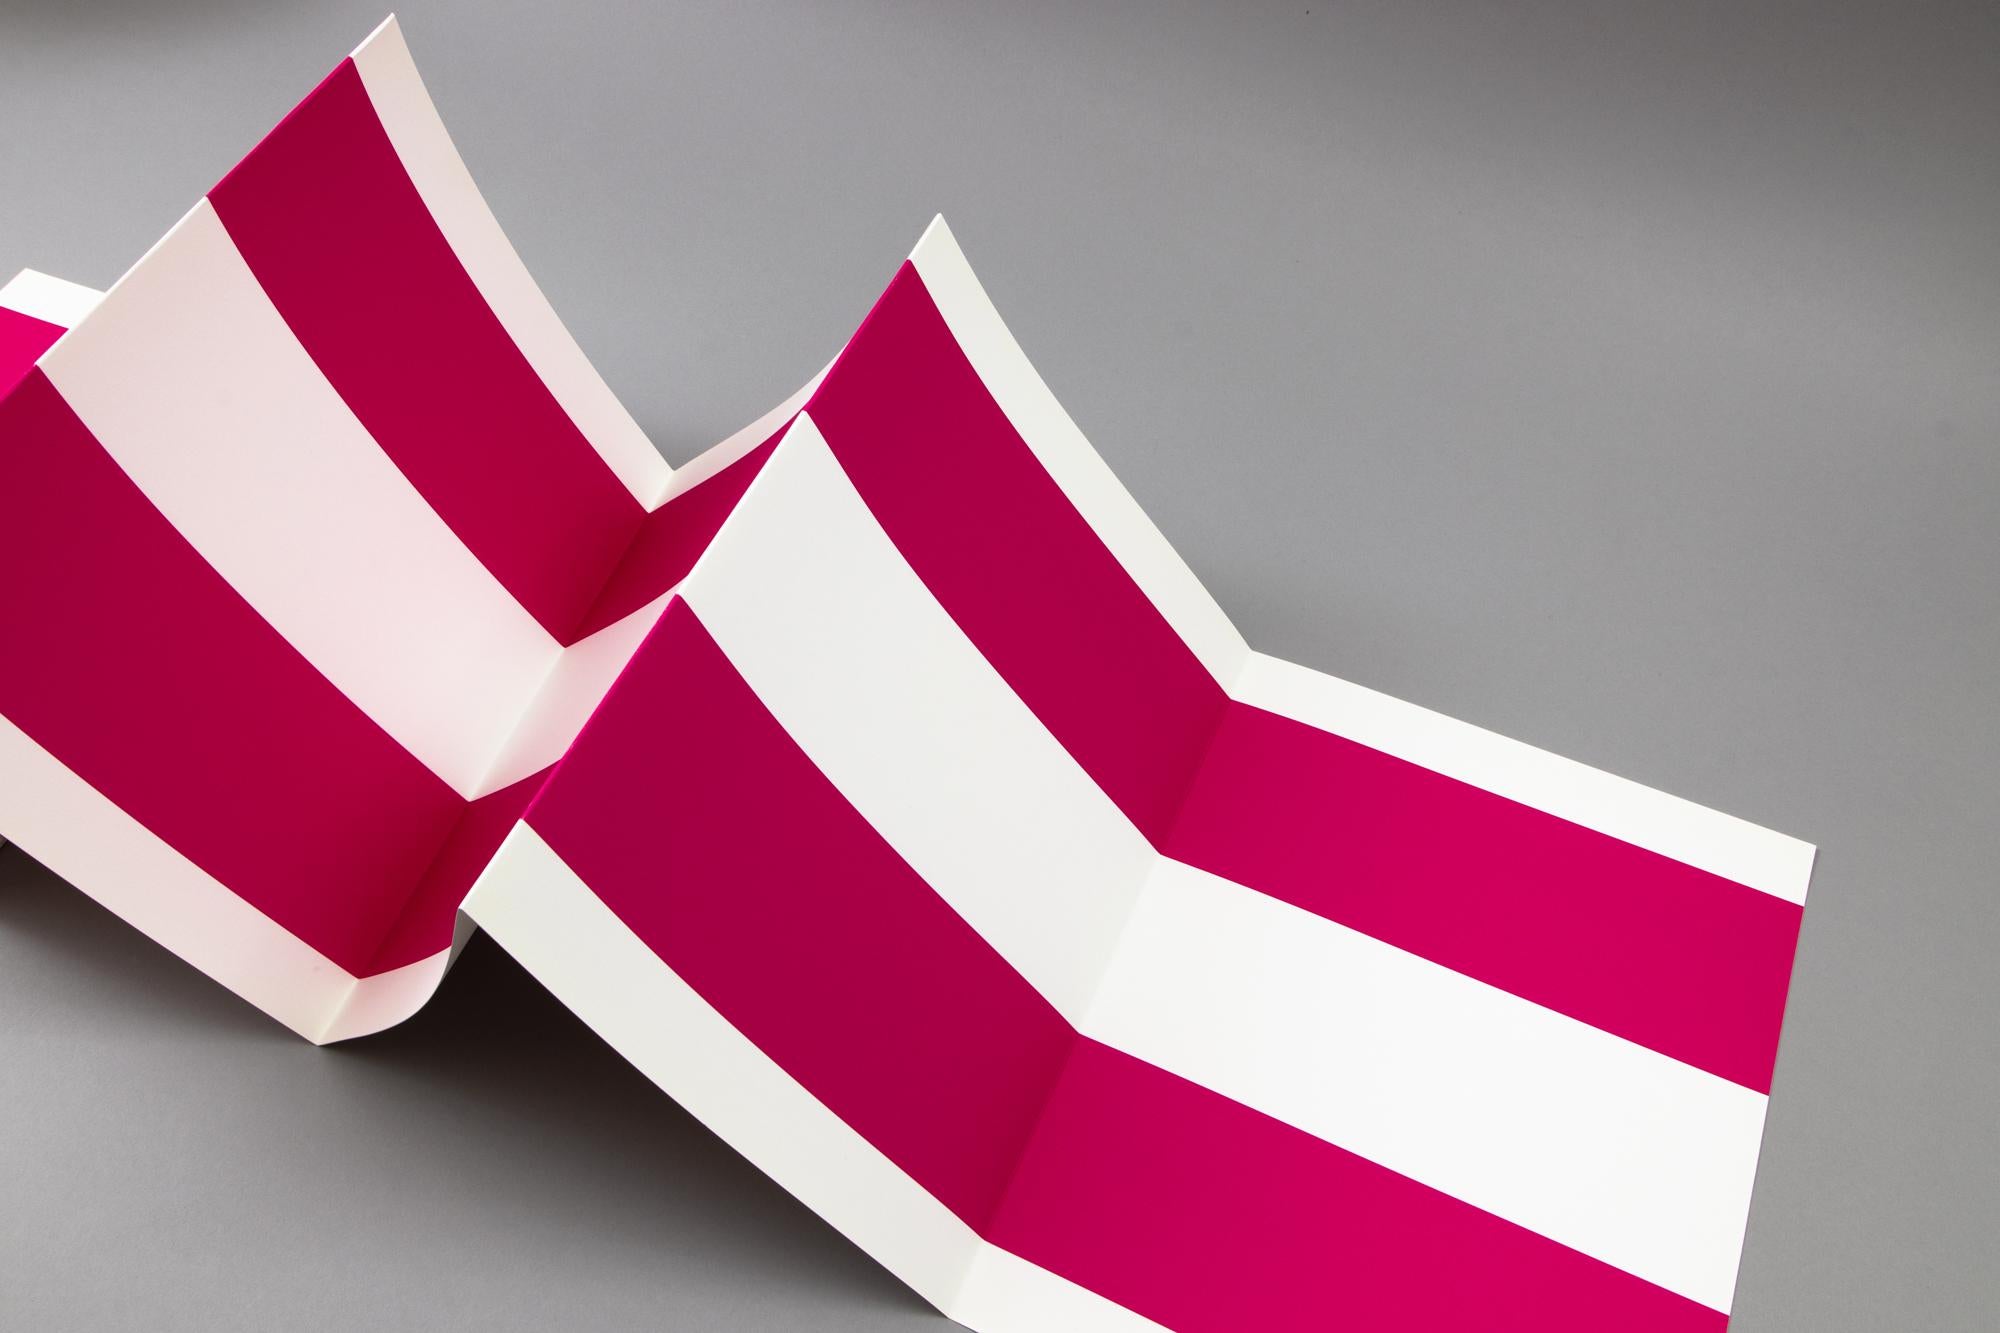 Daniel Buren (French, born 1938)
Untitled (Leporello), 2009
Medium: 10-part leporello, digital pigment print on 188 g Hahnemühle Photo Rag paper
Dimensions: 250 x 32 cm (98½ x 12½ in)
Edition: 75: Stamped and hand-numbered by the artist
Condition: